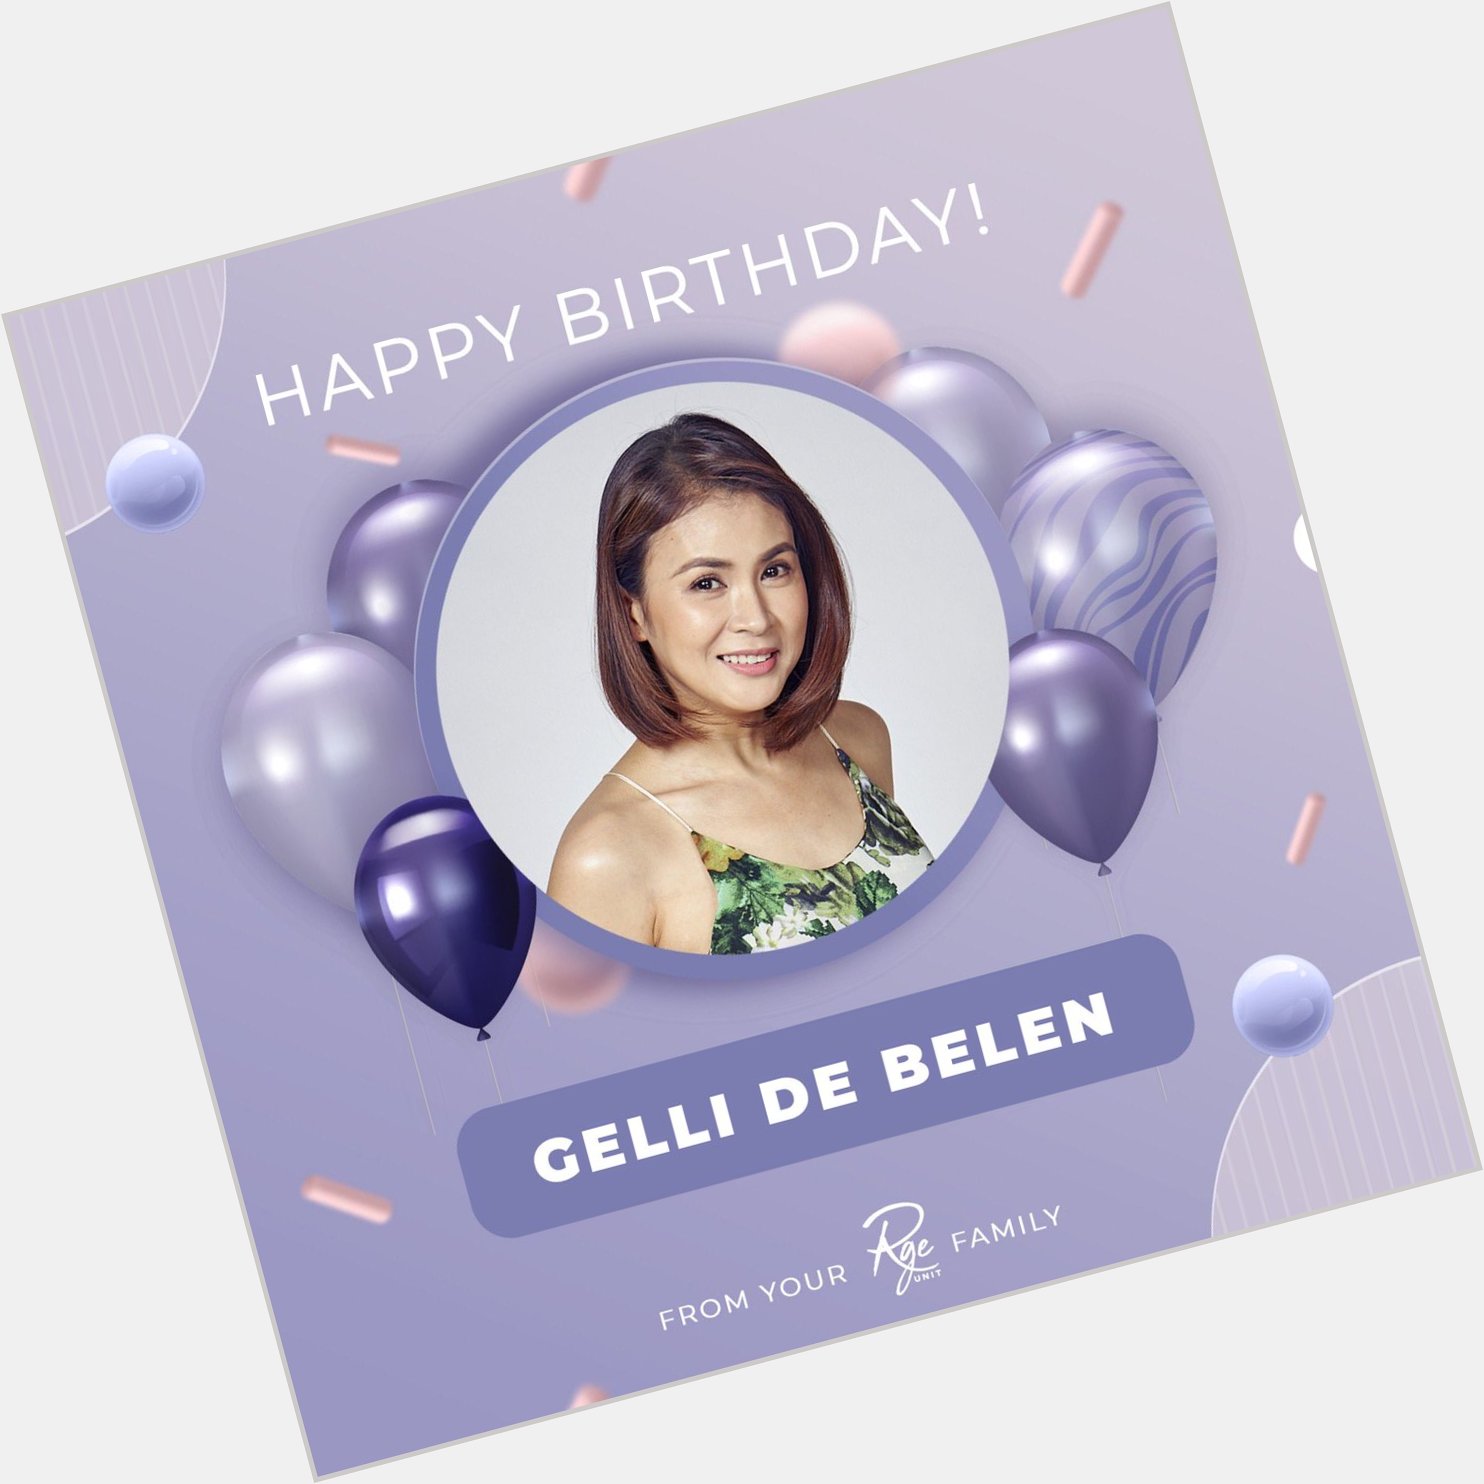 Happy Birthday, Gelli De Belen. Stay safe and God bless you always! Love from your and family.   